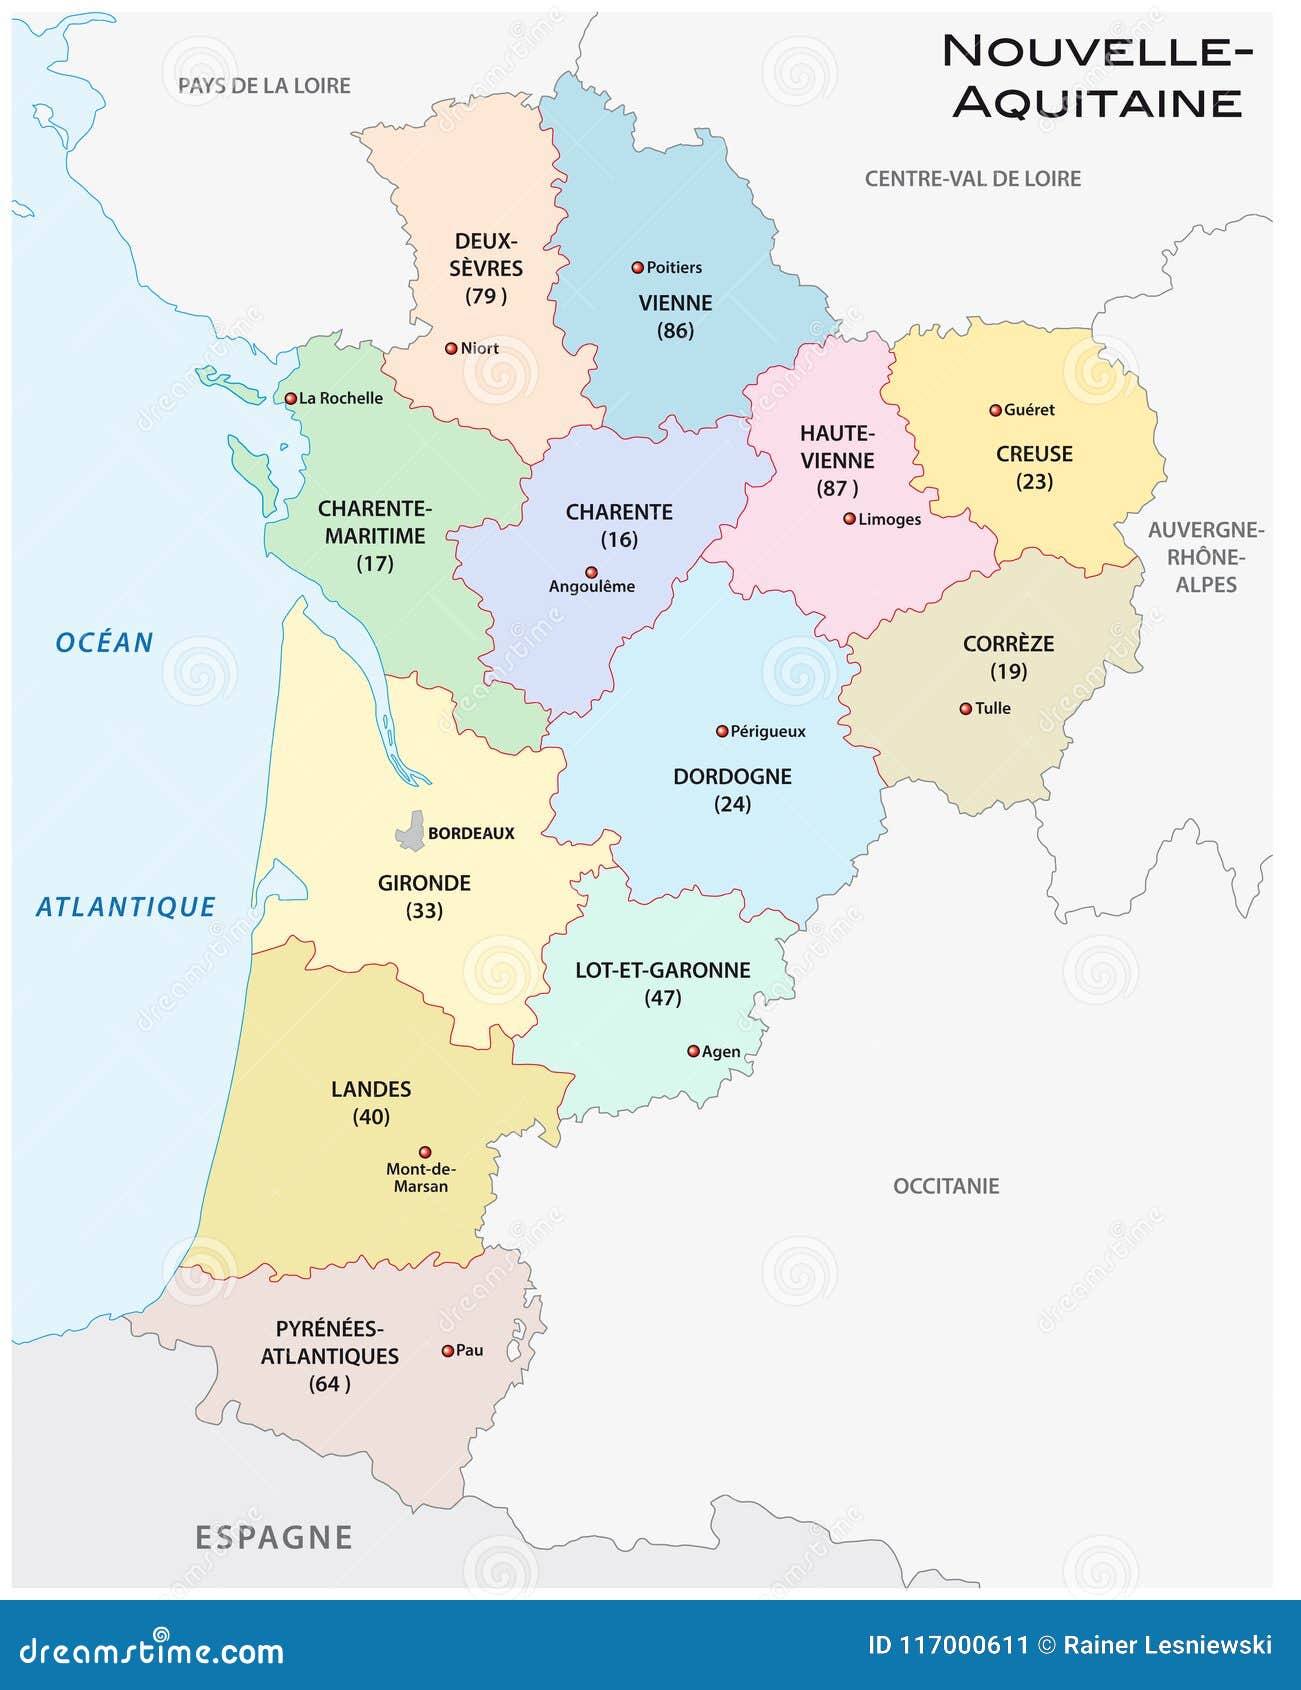 administrative and political  map of the region nouvelle-aquitaine, france